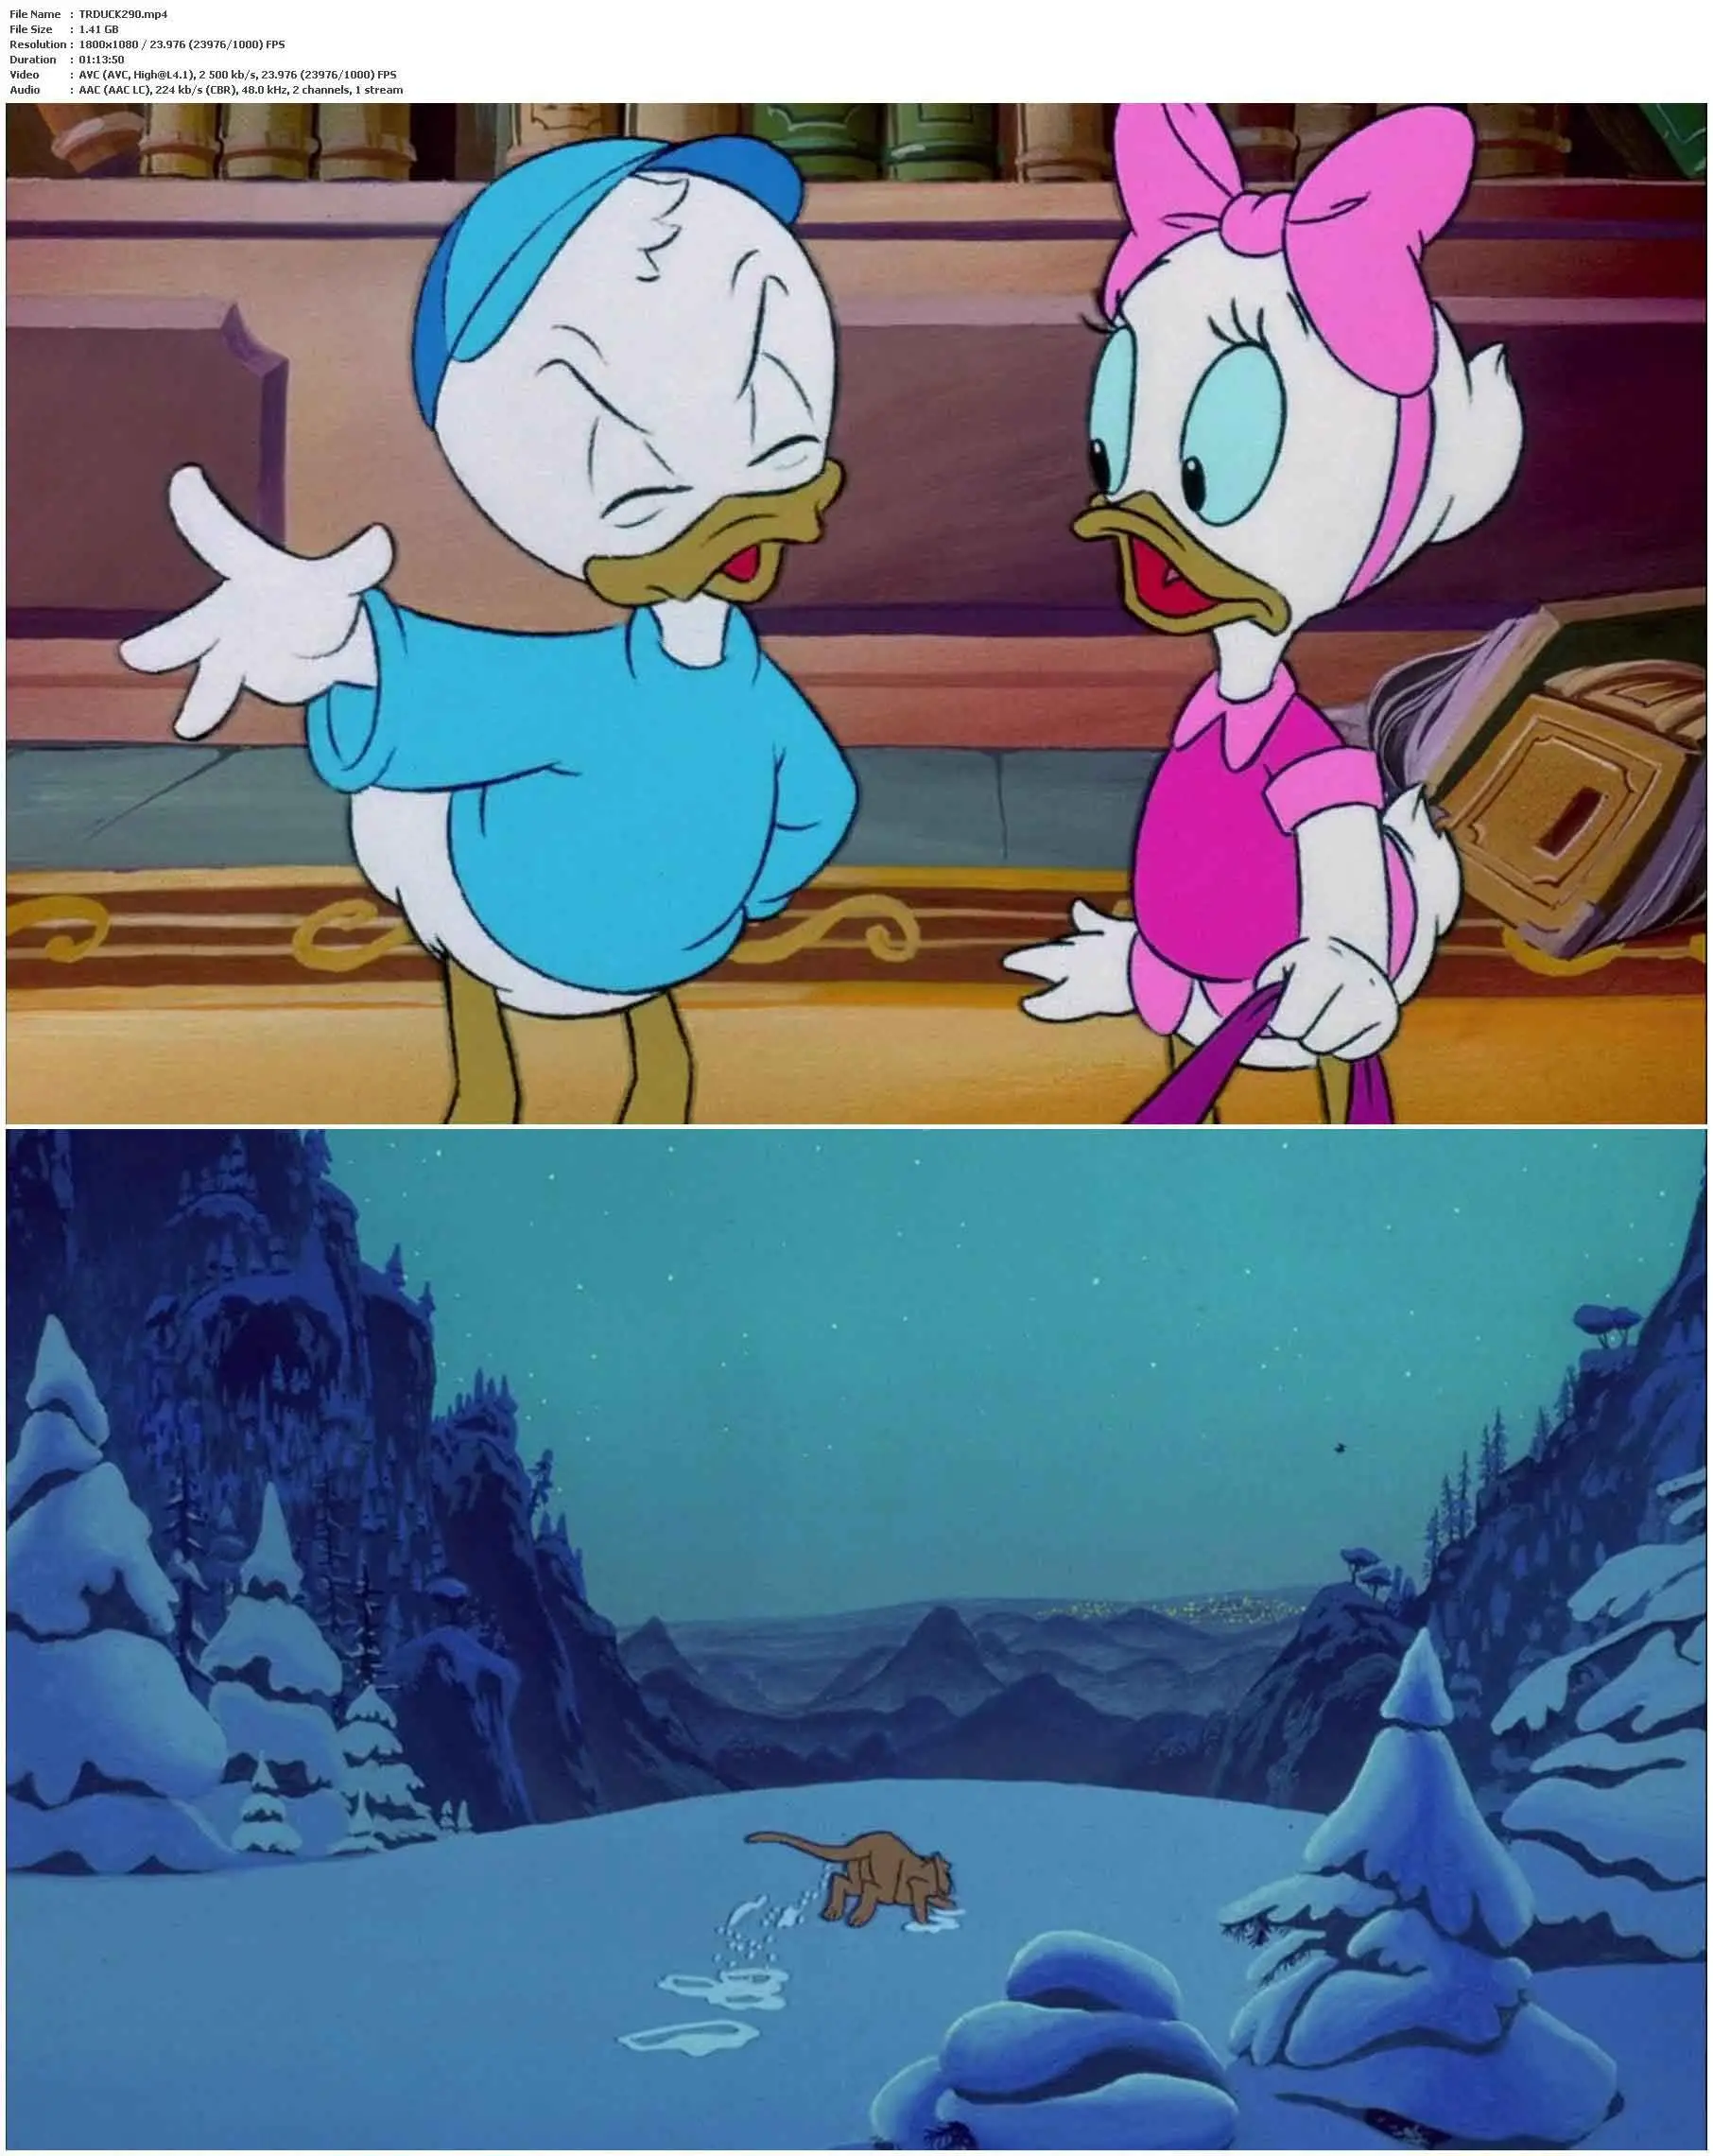 1990 DuckTales: The Movie - Treasure Of The Lost Lamp